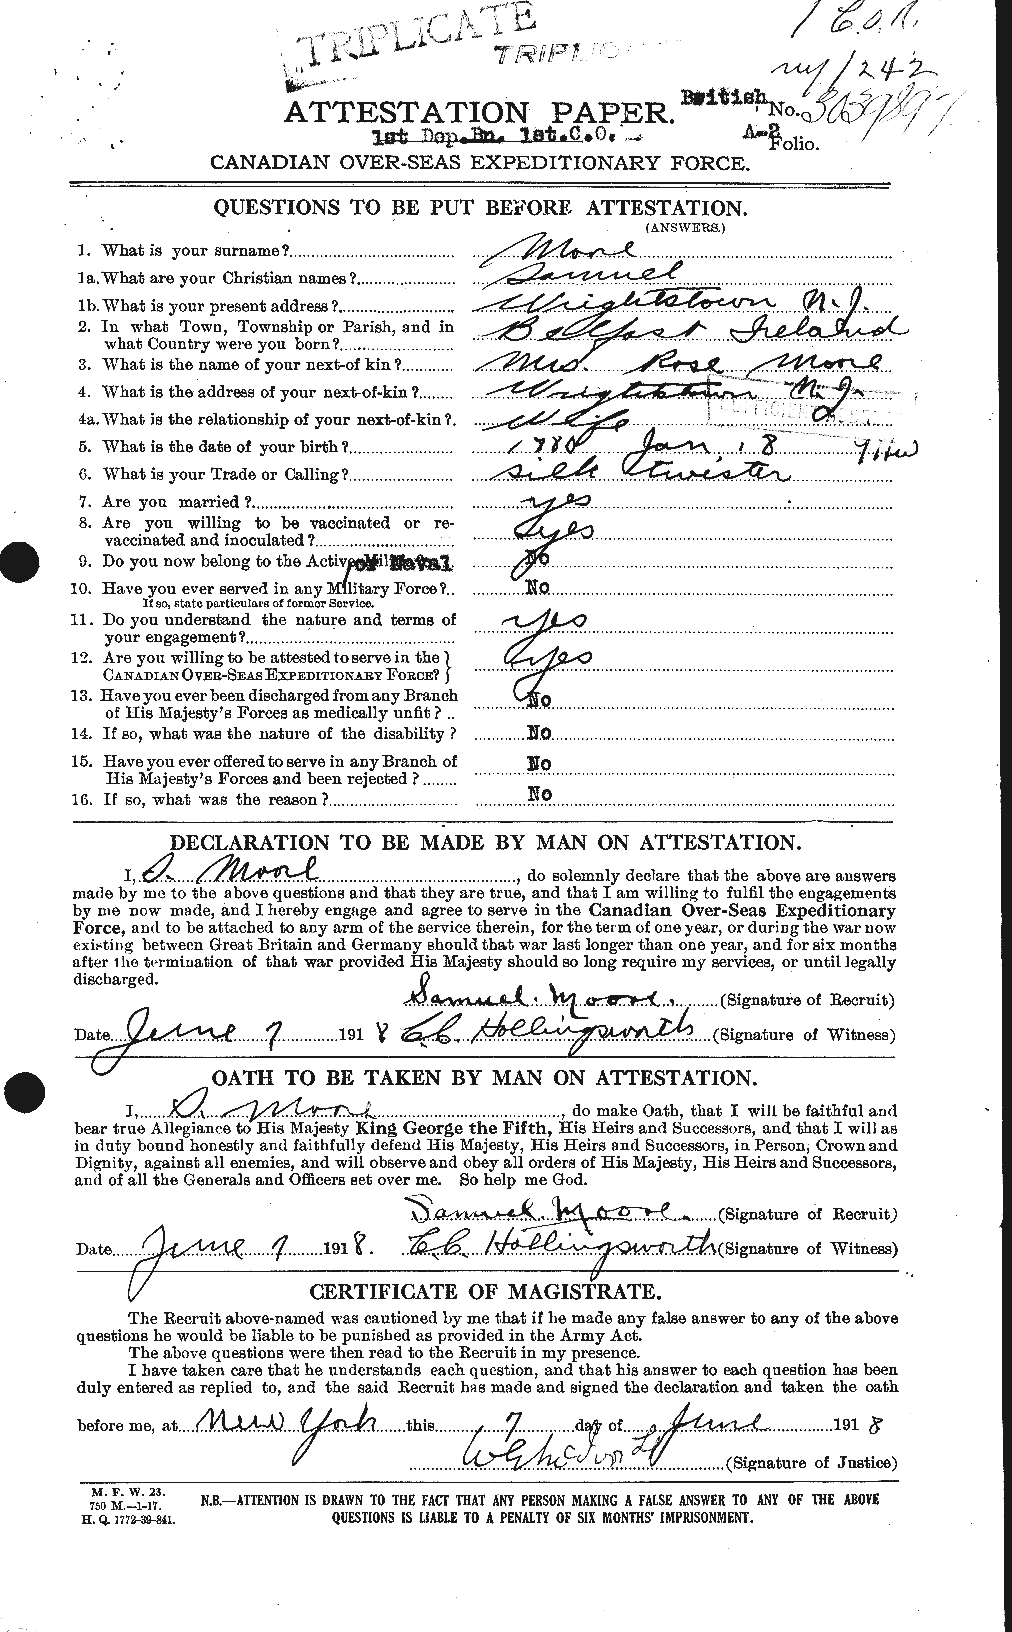 Personnel Records of the First World War - CEF 505561a